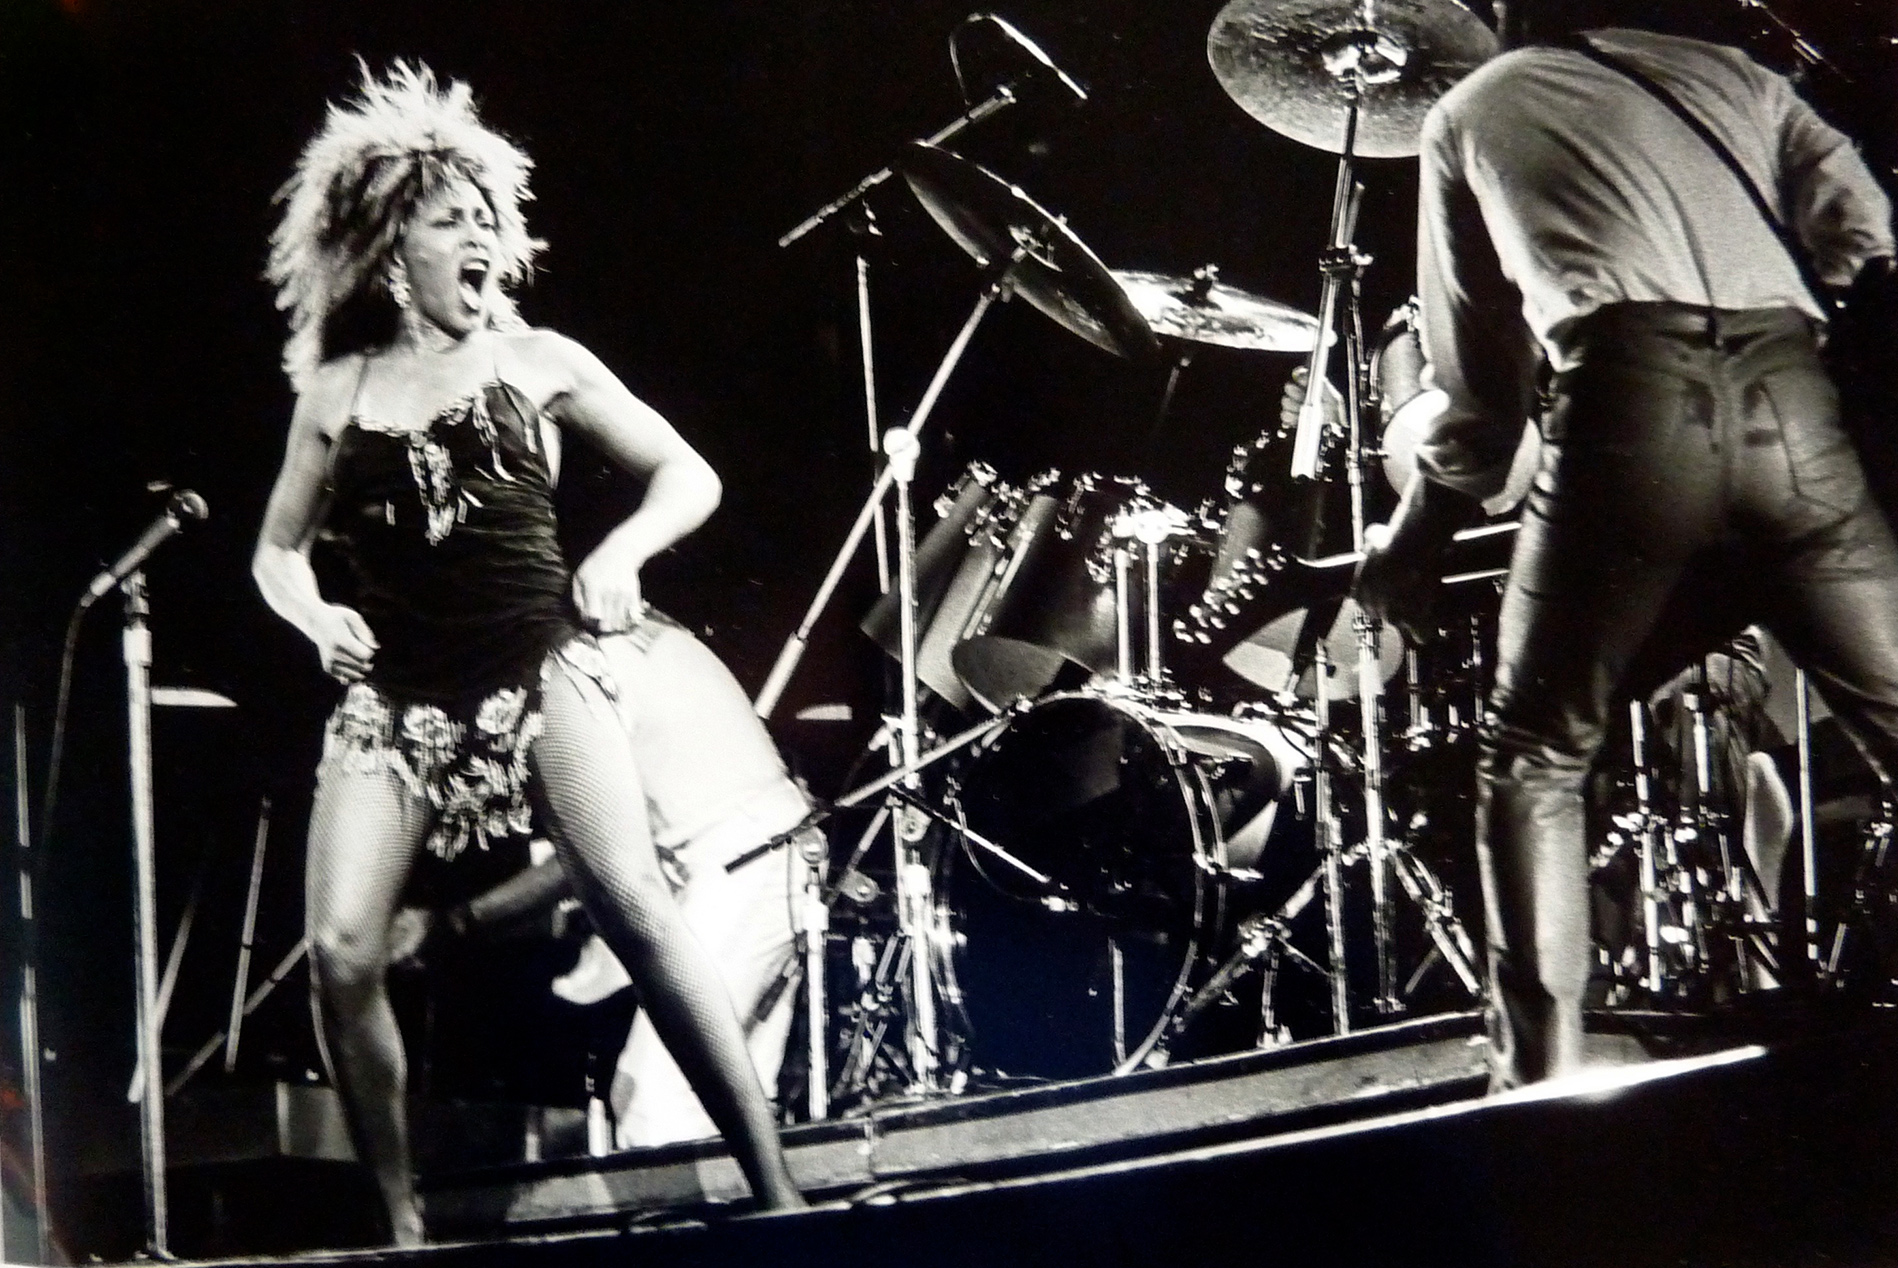 Turner on stage at the Forum in Los Angeles in 1984 on the "Private Dancer" tour.